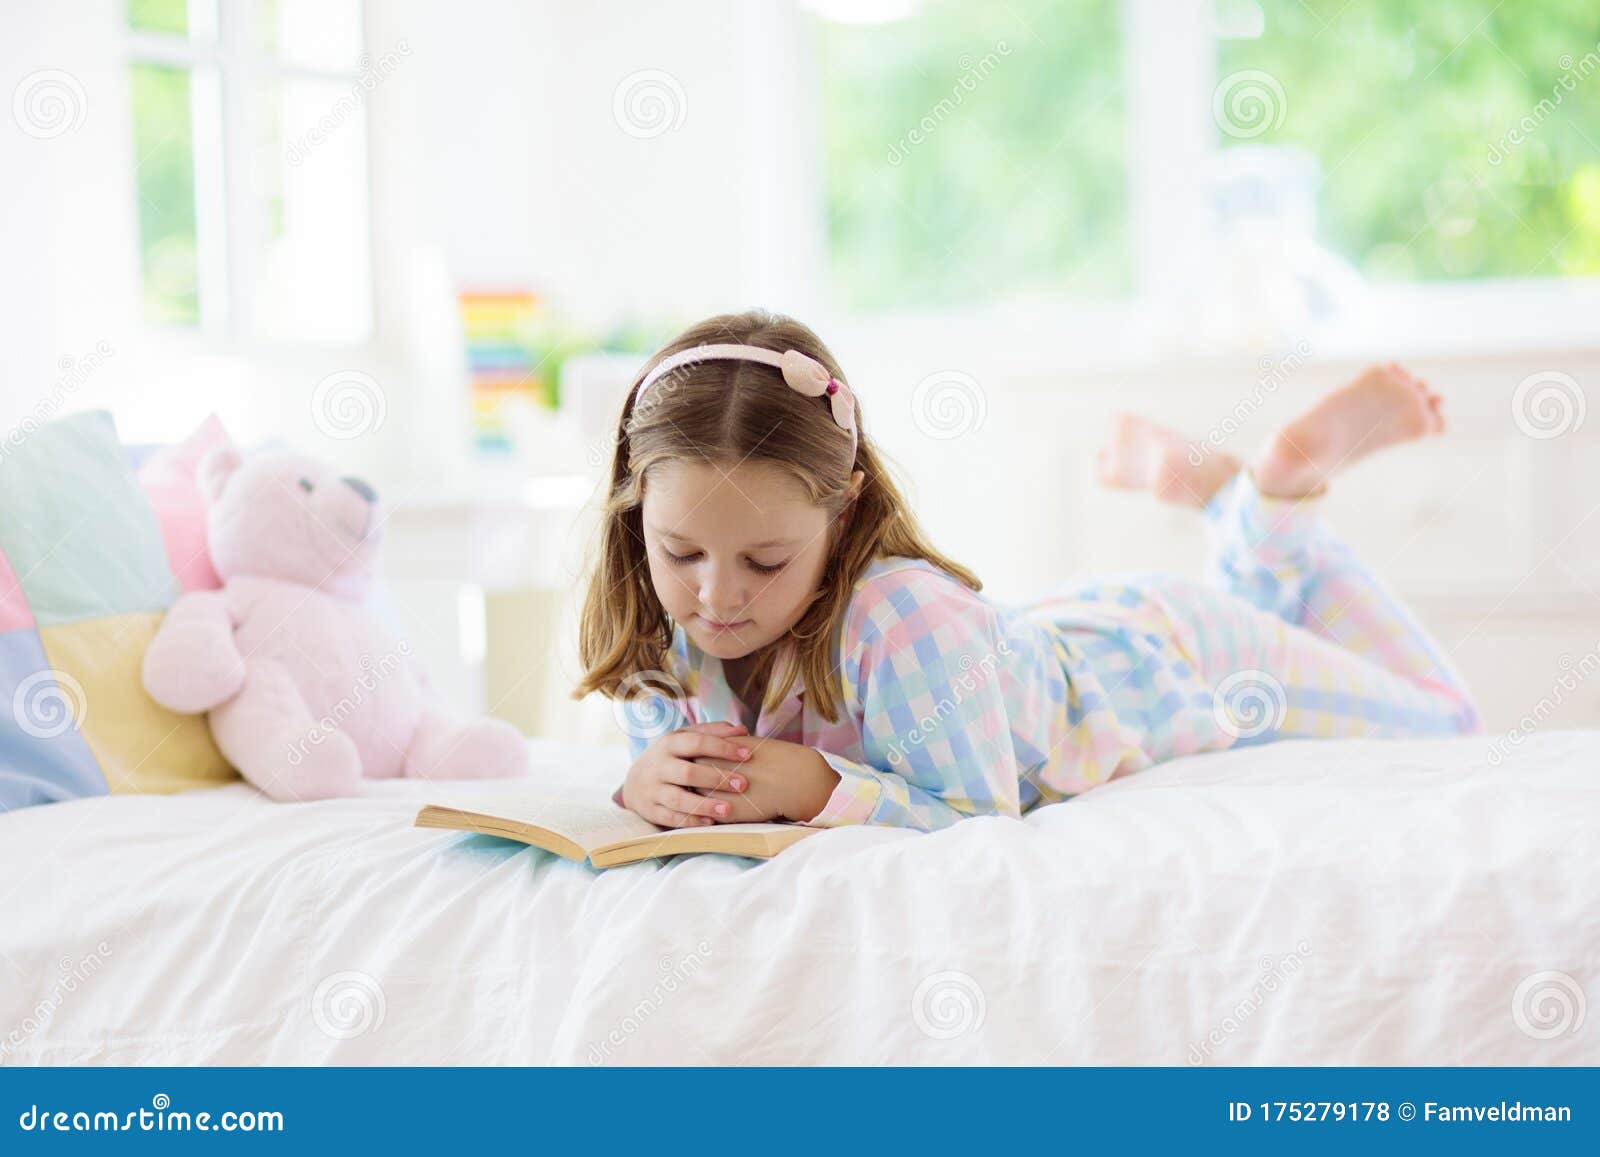 Child Reading Book In Bed Kids Read In Bedroom Stock Photo Image Of Baby Interior 175279178